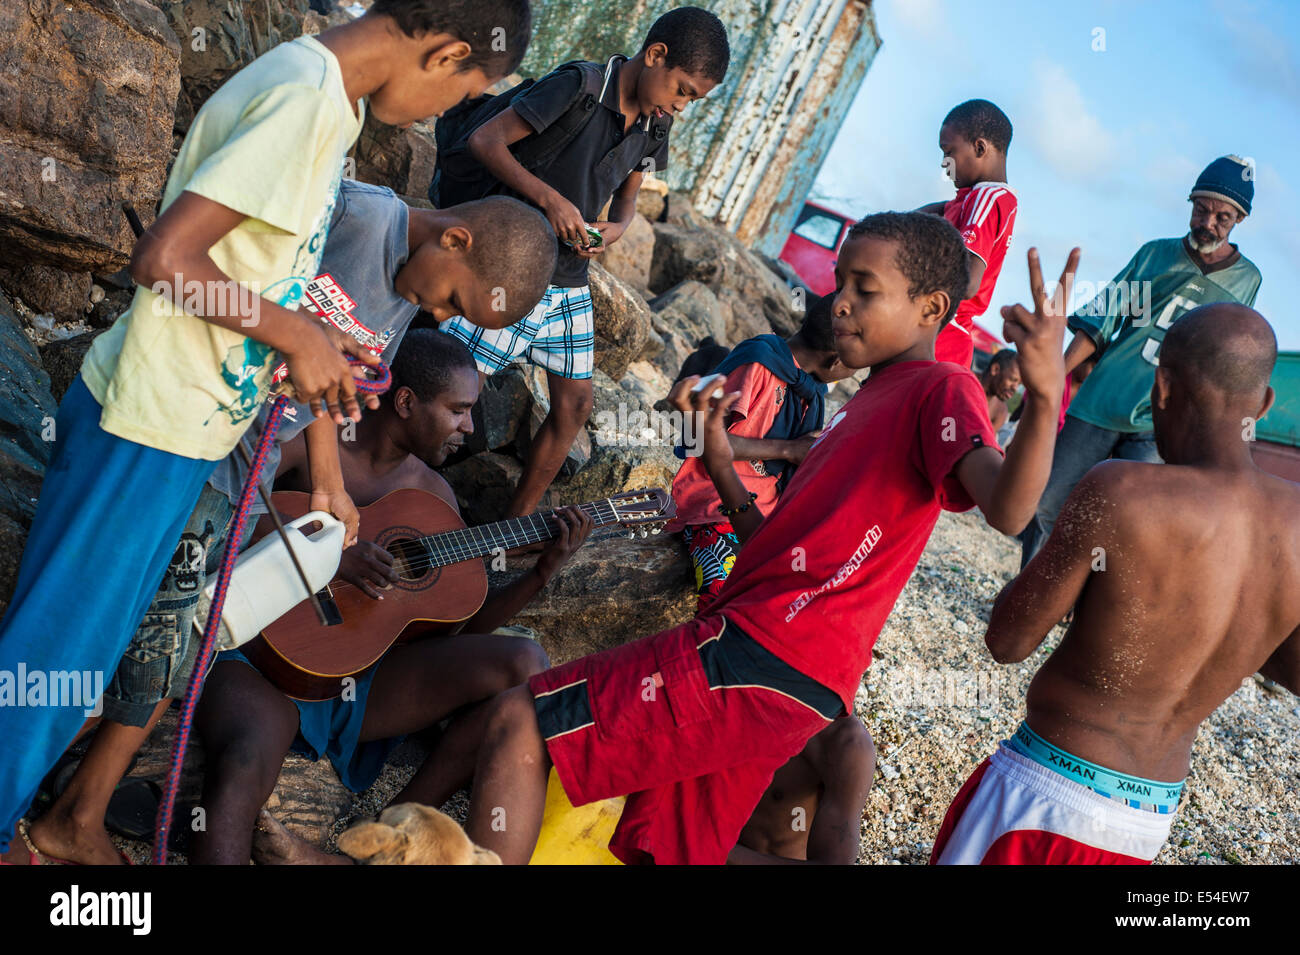 Young people on the beach in Mindelo, Sao Vicente Island, Cape Verde. Stock Photo